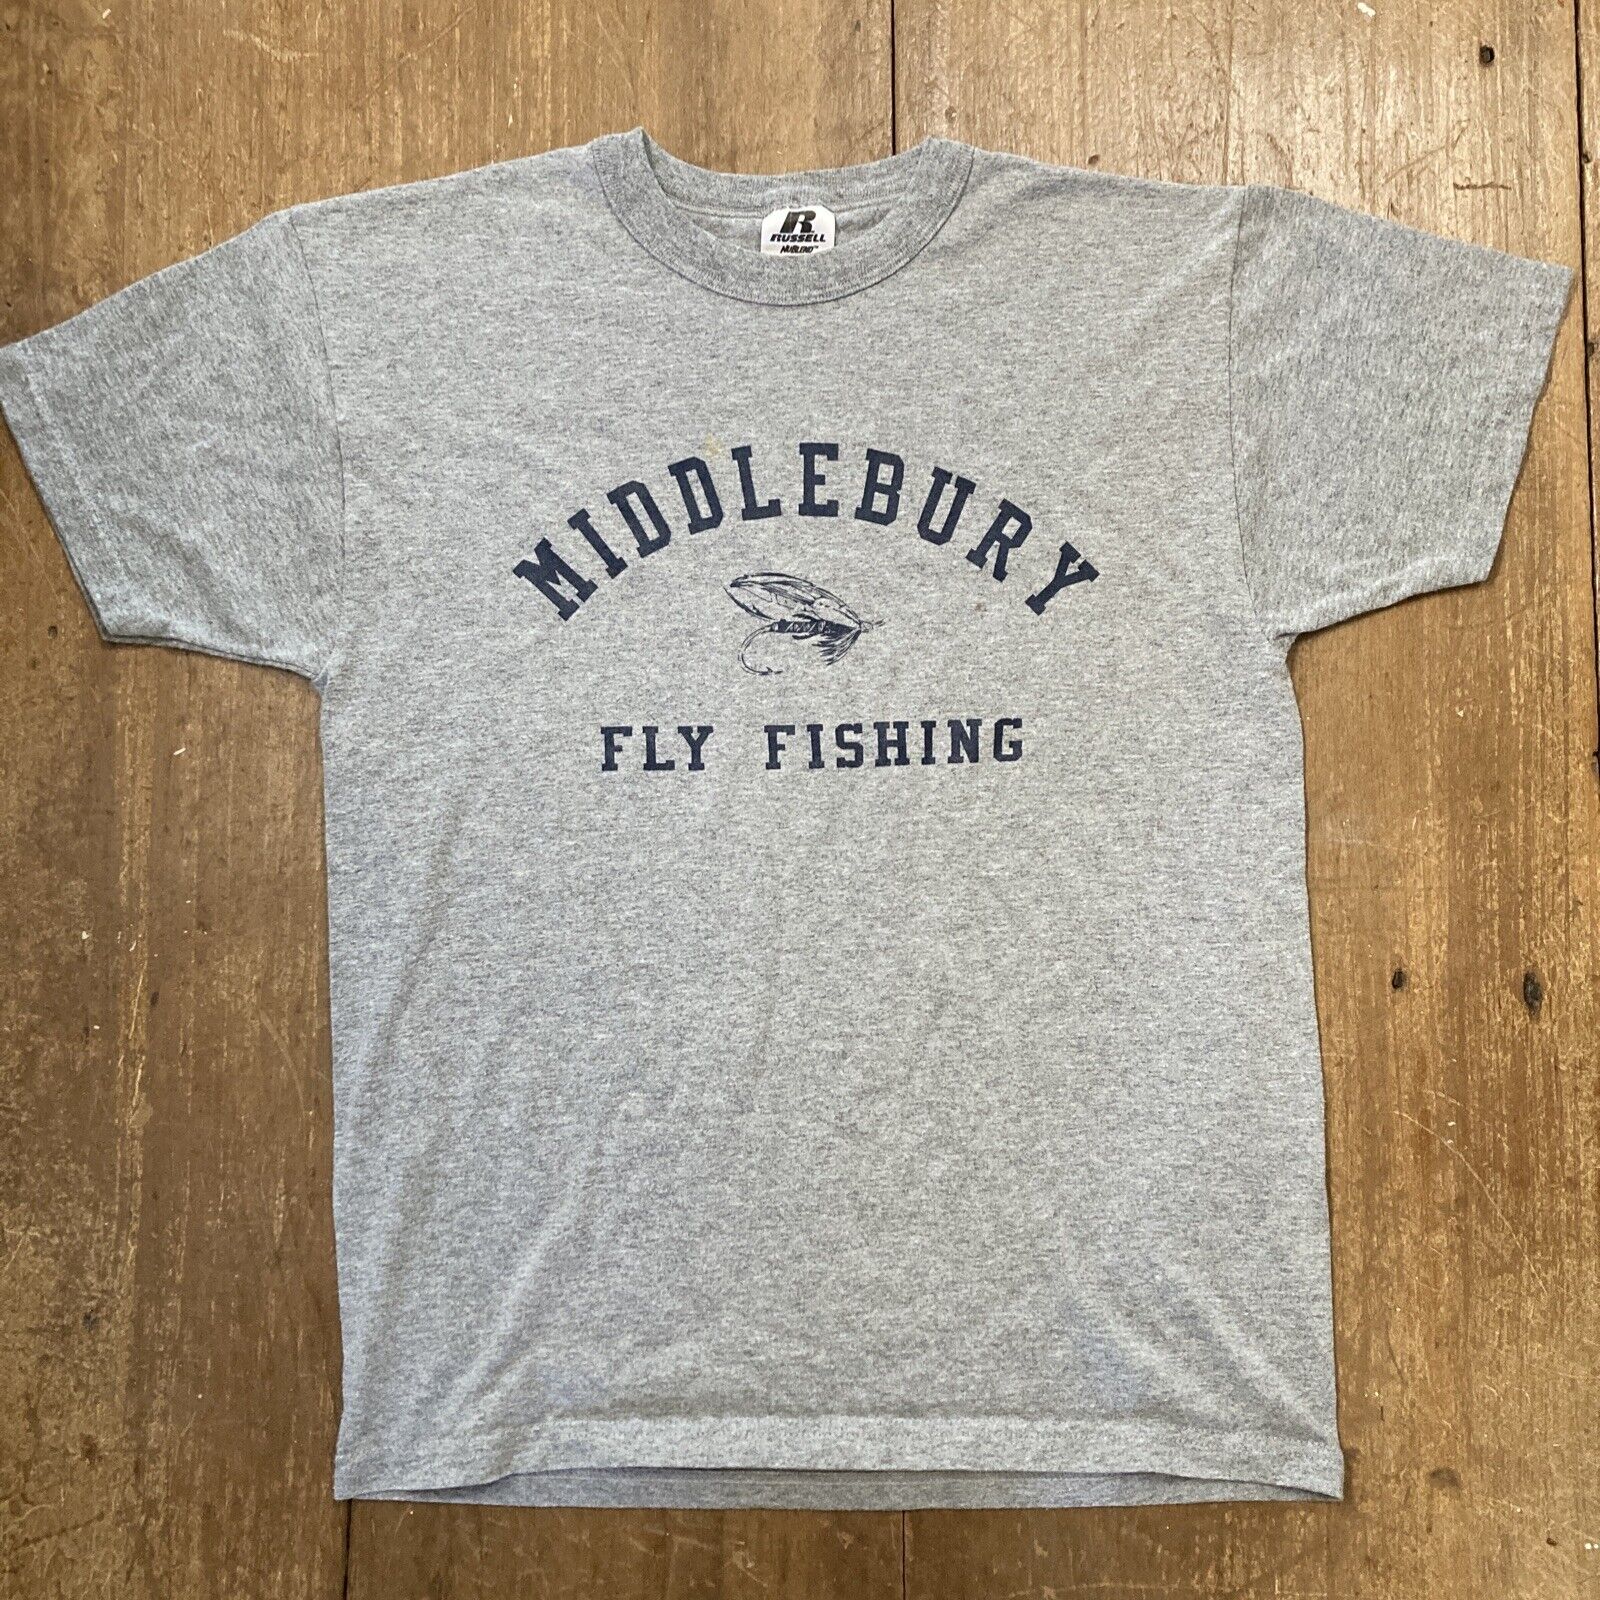 Vintage MIDDLEBURY COLLEGE FLY FISHING Tee Shirt Gray Russell